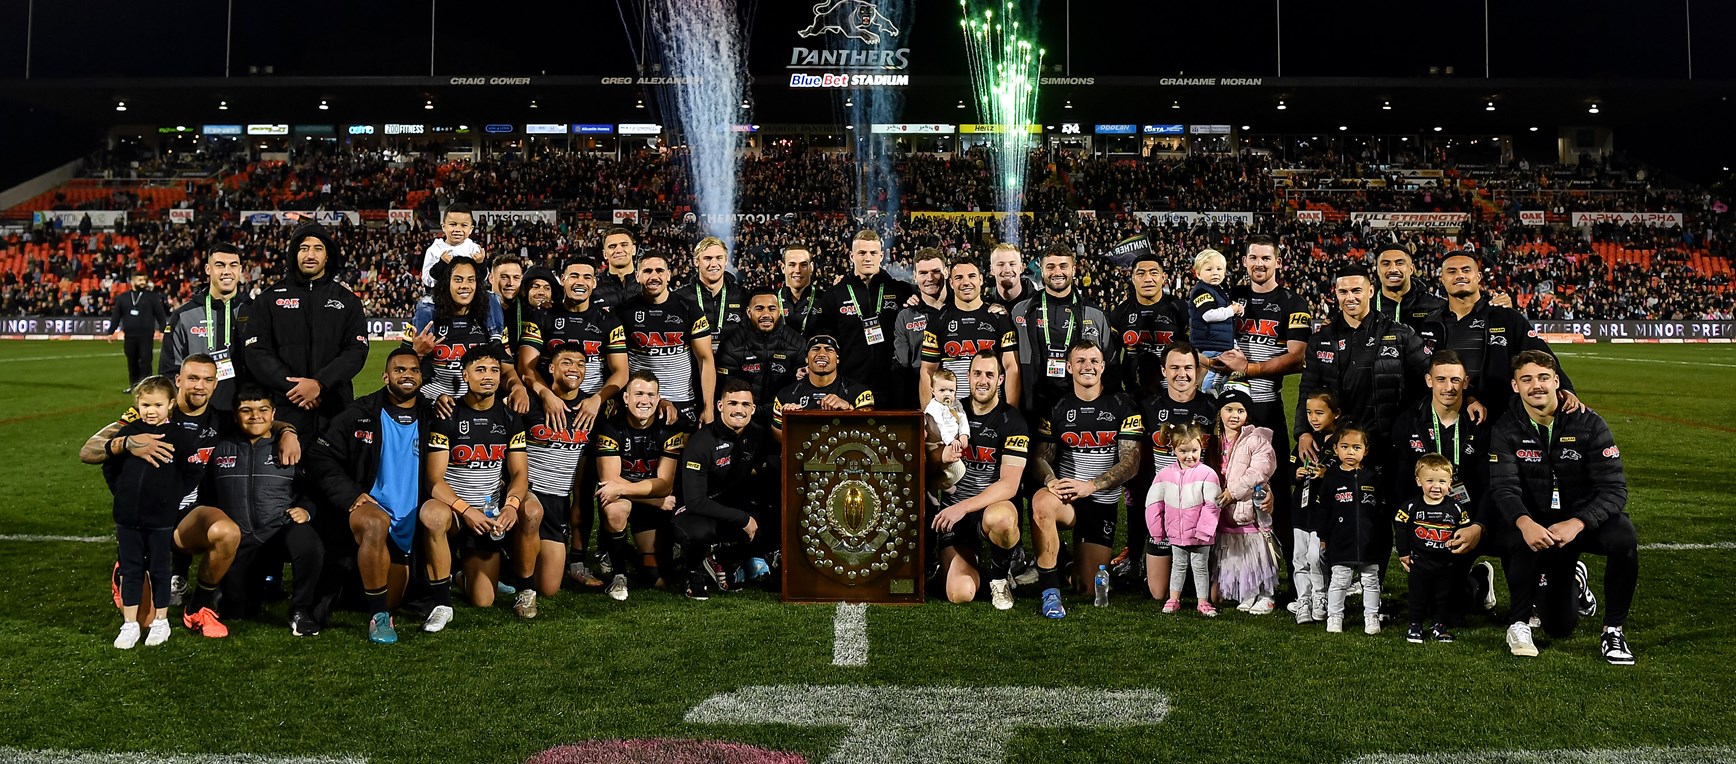 OAK Plus Gallery: Panthers v Warriors